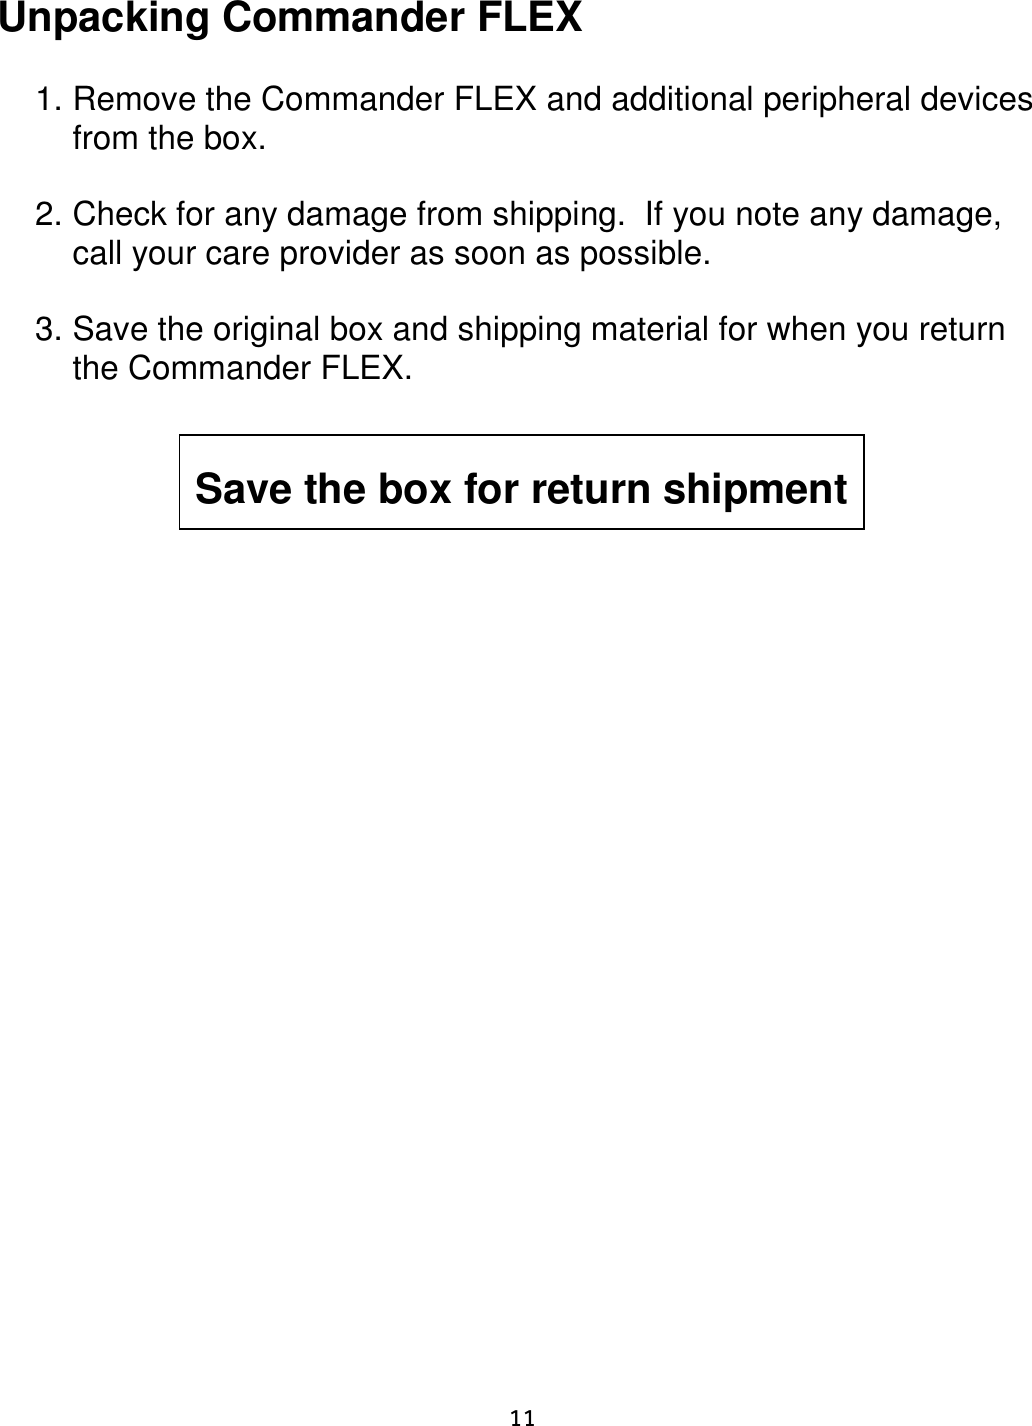     11  Unpacking Commander FLEX   1. Remove the Commander FLEX and additional peripheral devices from the box.  2. Check for any damage from shipping.  If you note any damage, call your care provider as soon as possible.    3. Save the original box and shipping material for when you return the Commander FLEX.                Save the box for return shipment 